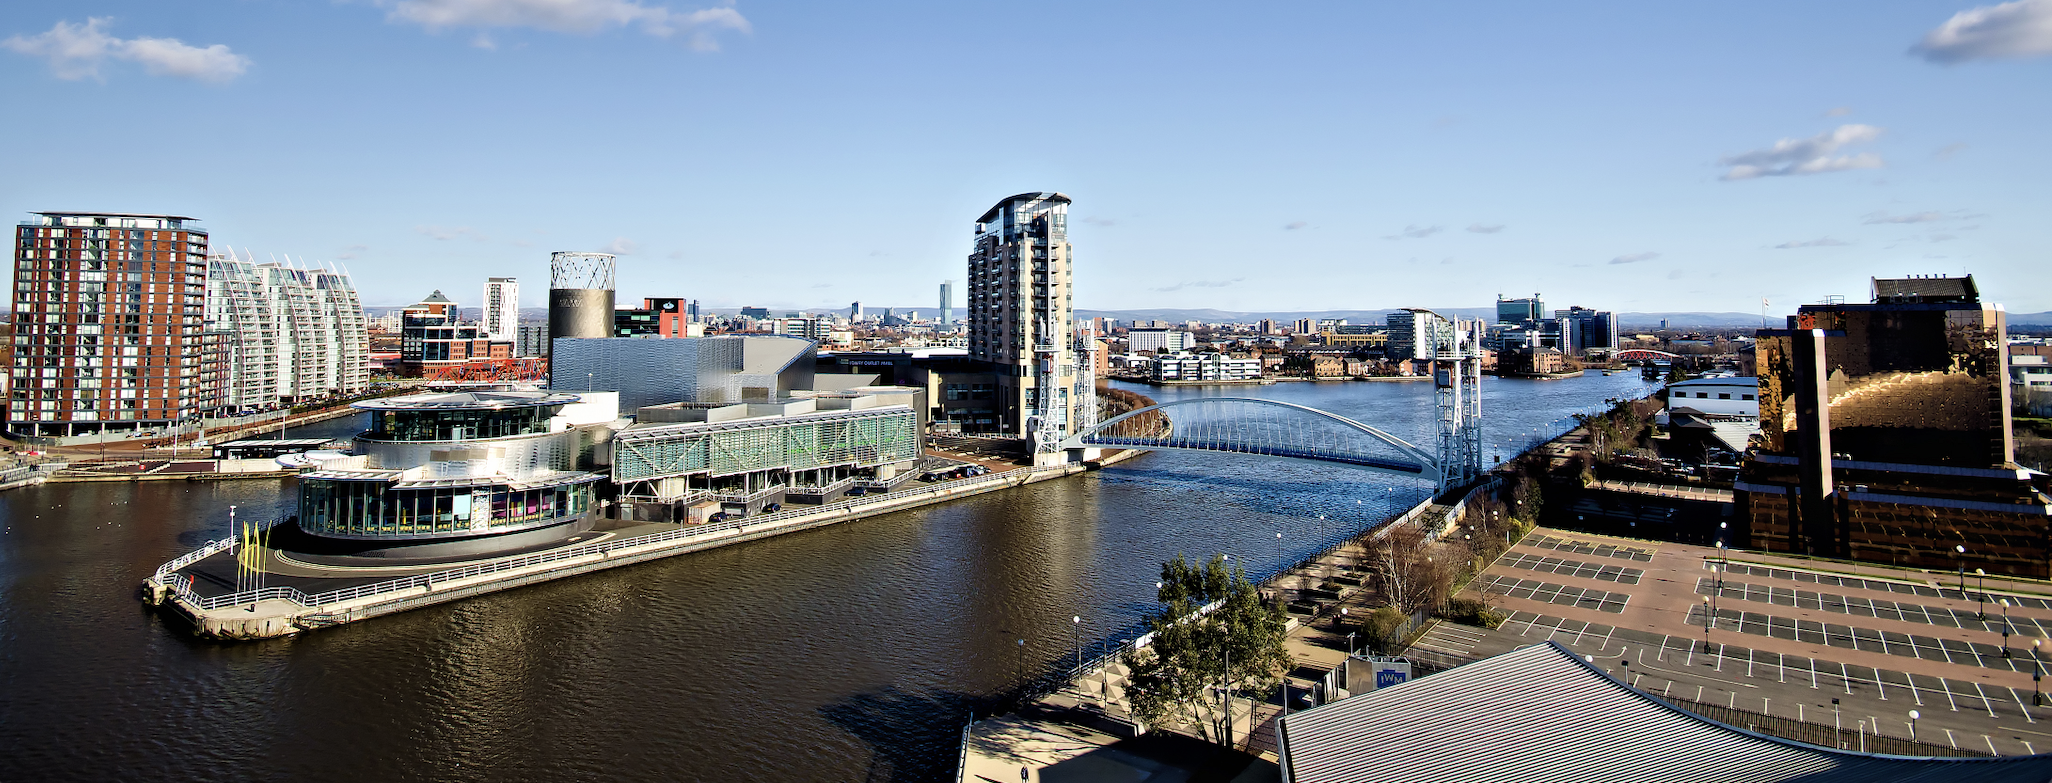 Modern buildings and bridge at Salford Quays, Greater Manchester, England, UK.